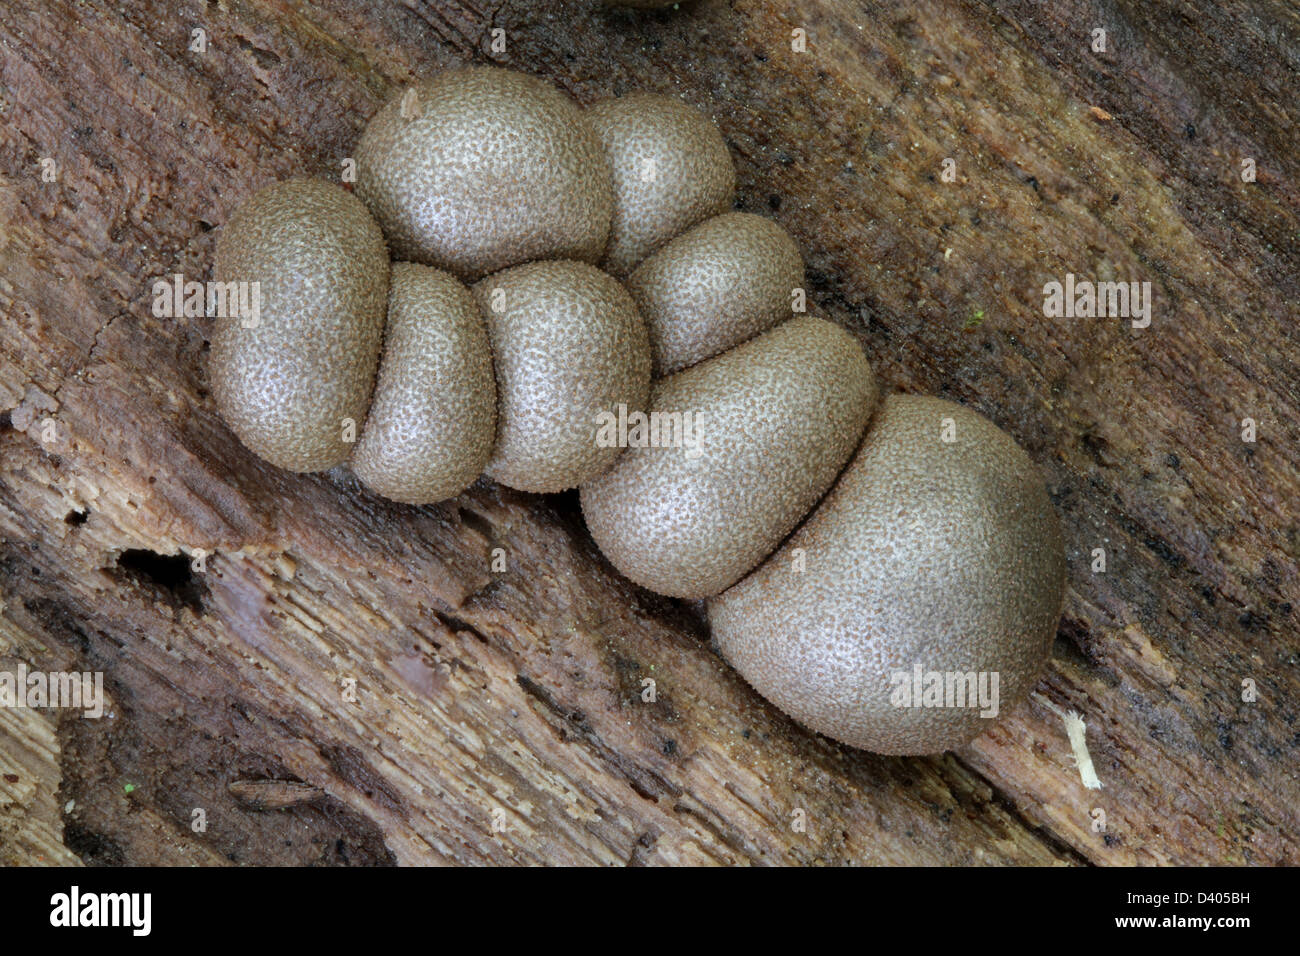 Fruiting bodies of the wolf's milk slime mold, Lycogala epidendrum. Stock Photo